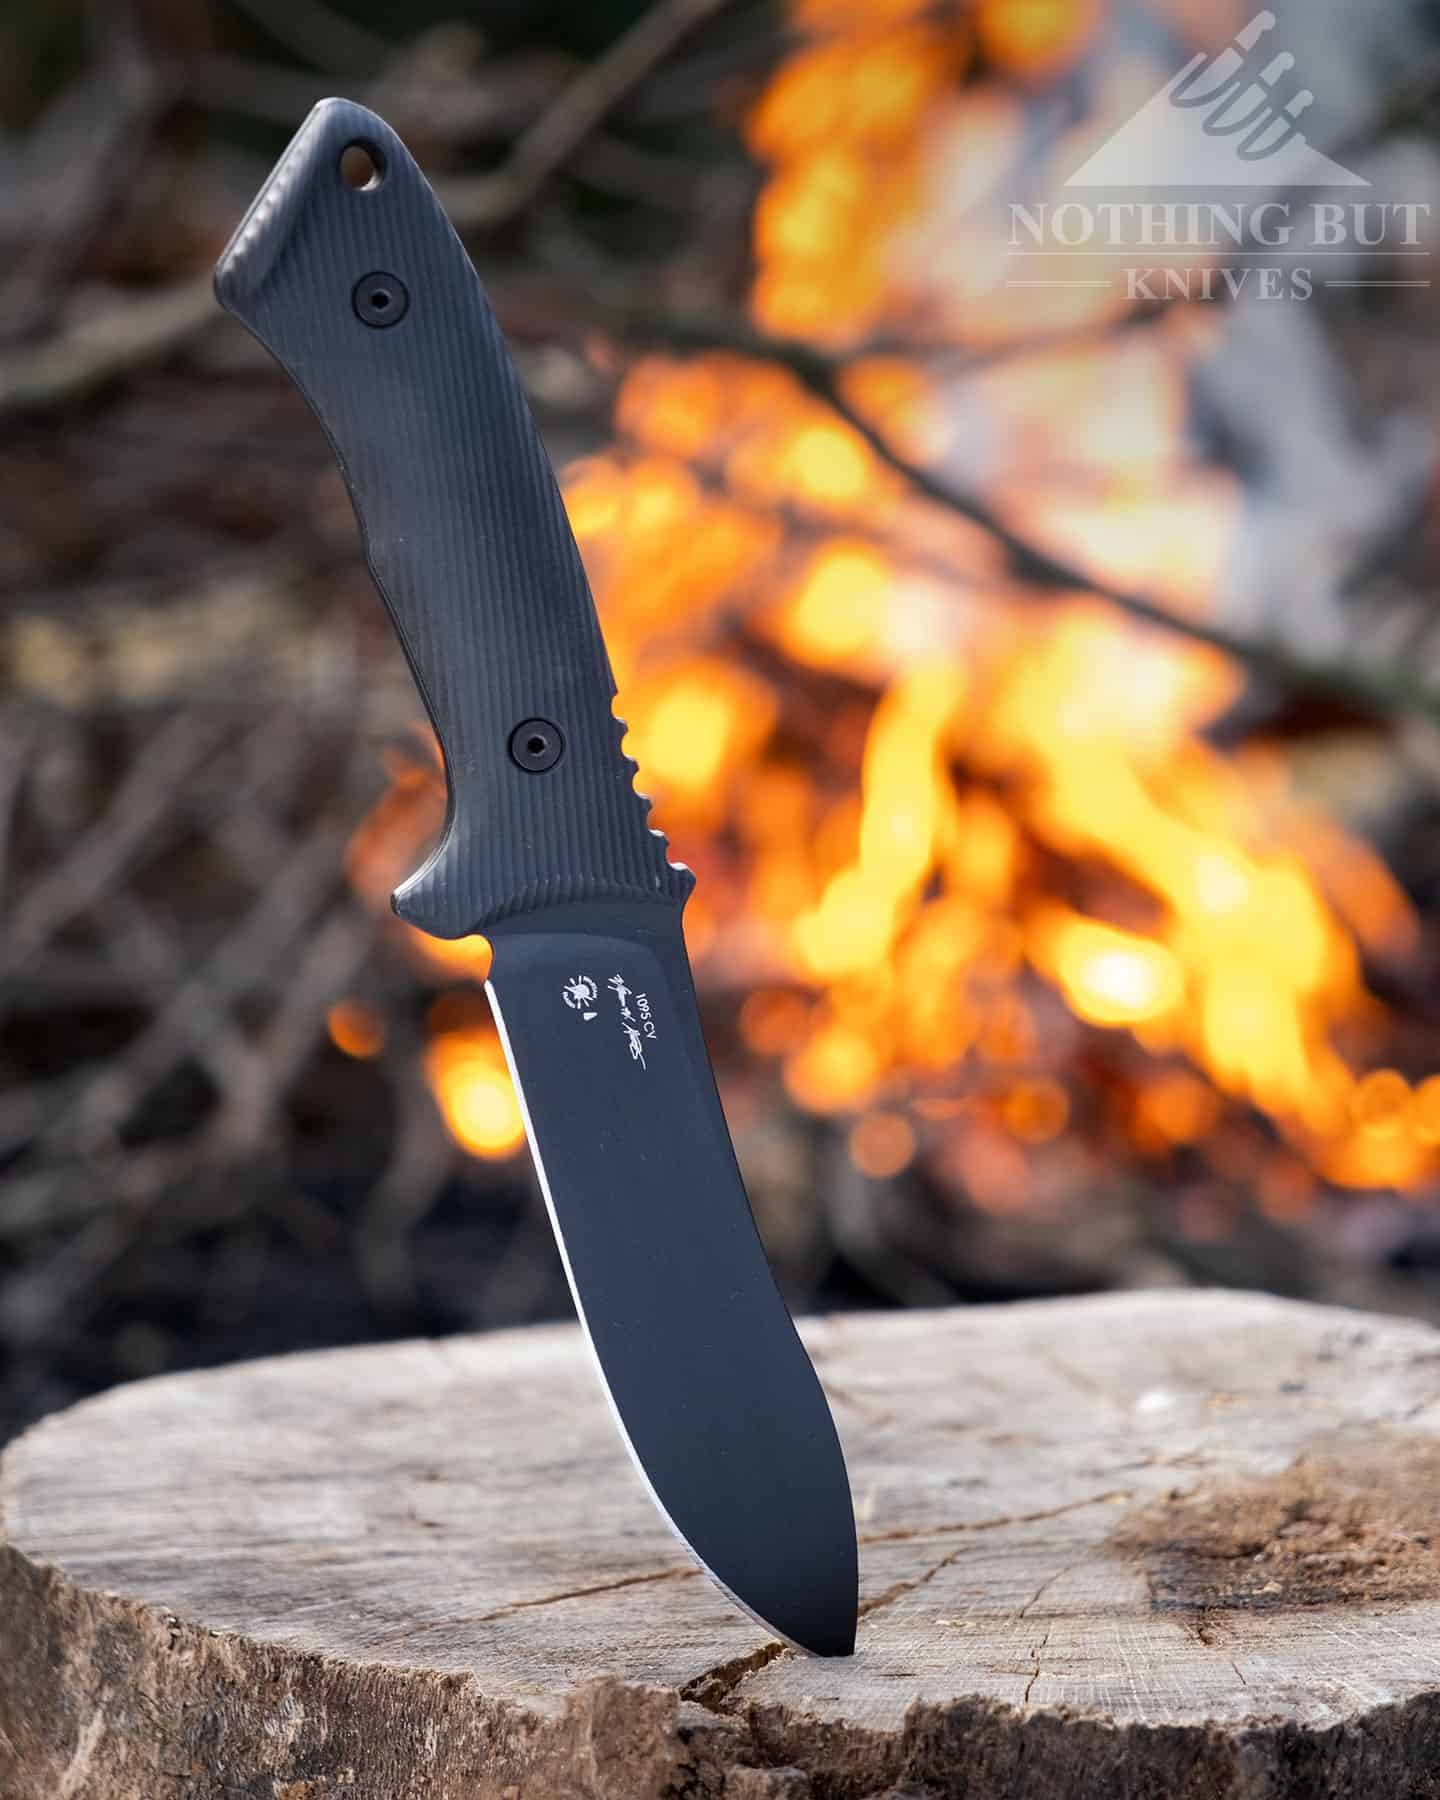 The Spartan Blades Halsey Nessmuck is a modern take on an American classic and a handy survival knife for the wilderness.